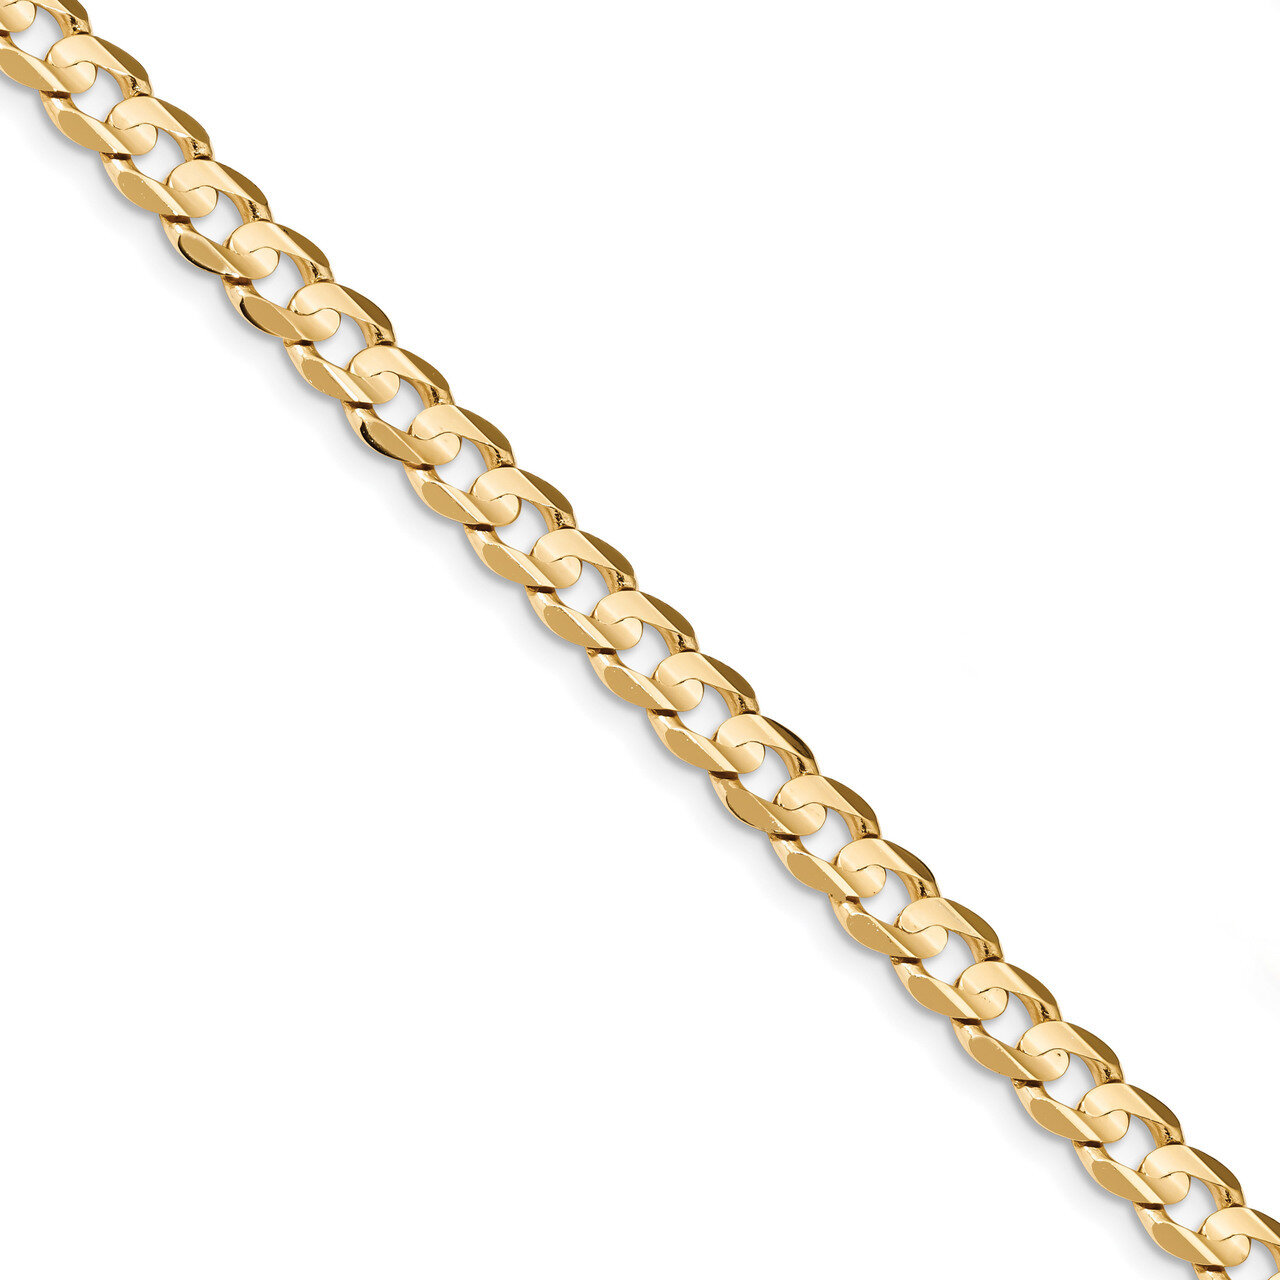 8 Inch 7.5mm Open Concave Curb Chain 14k Gold LCR200-8